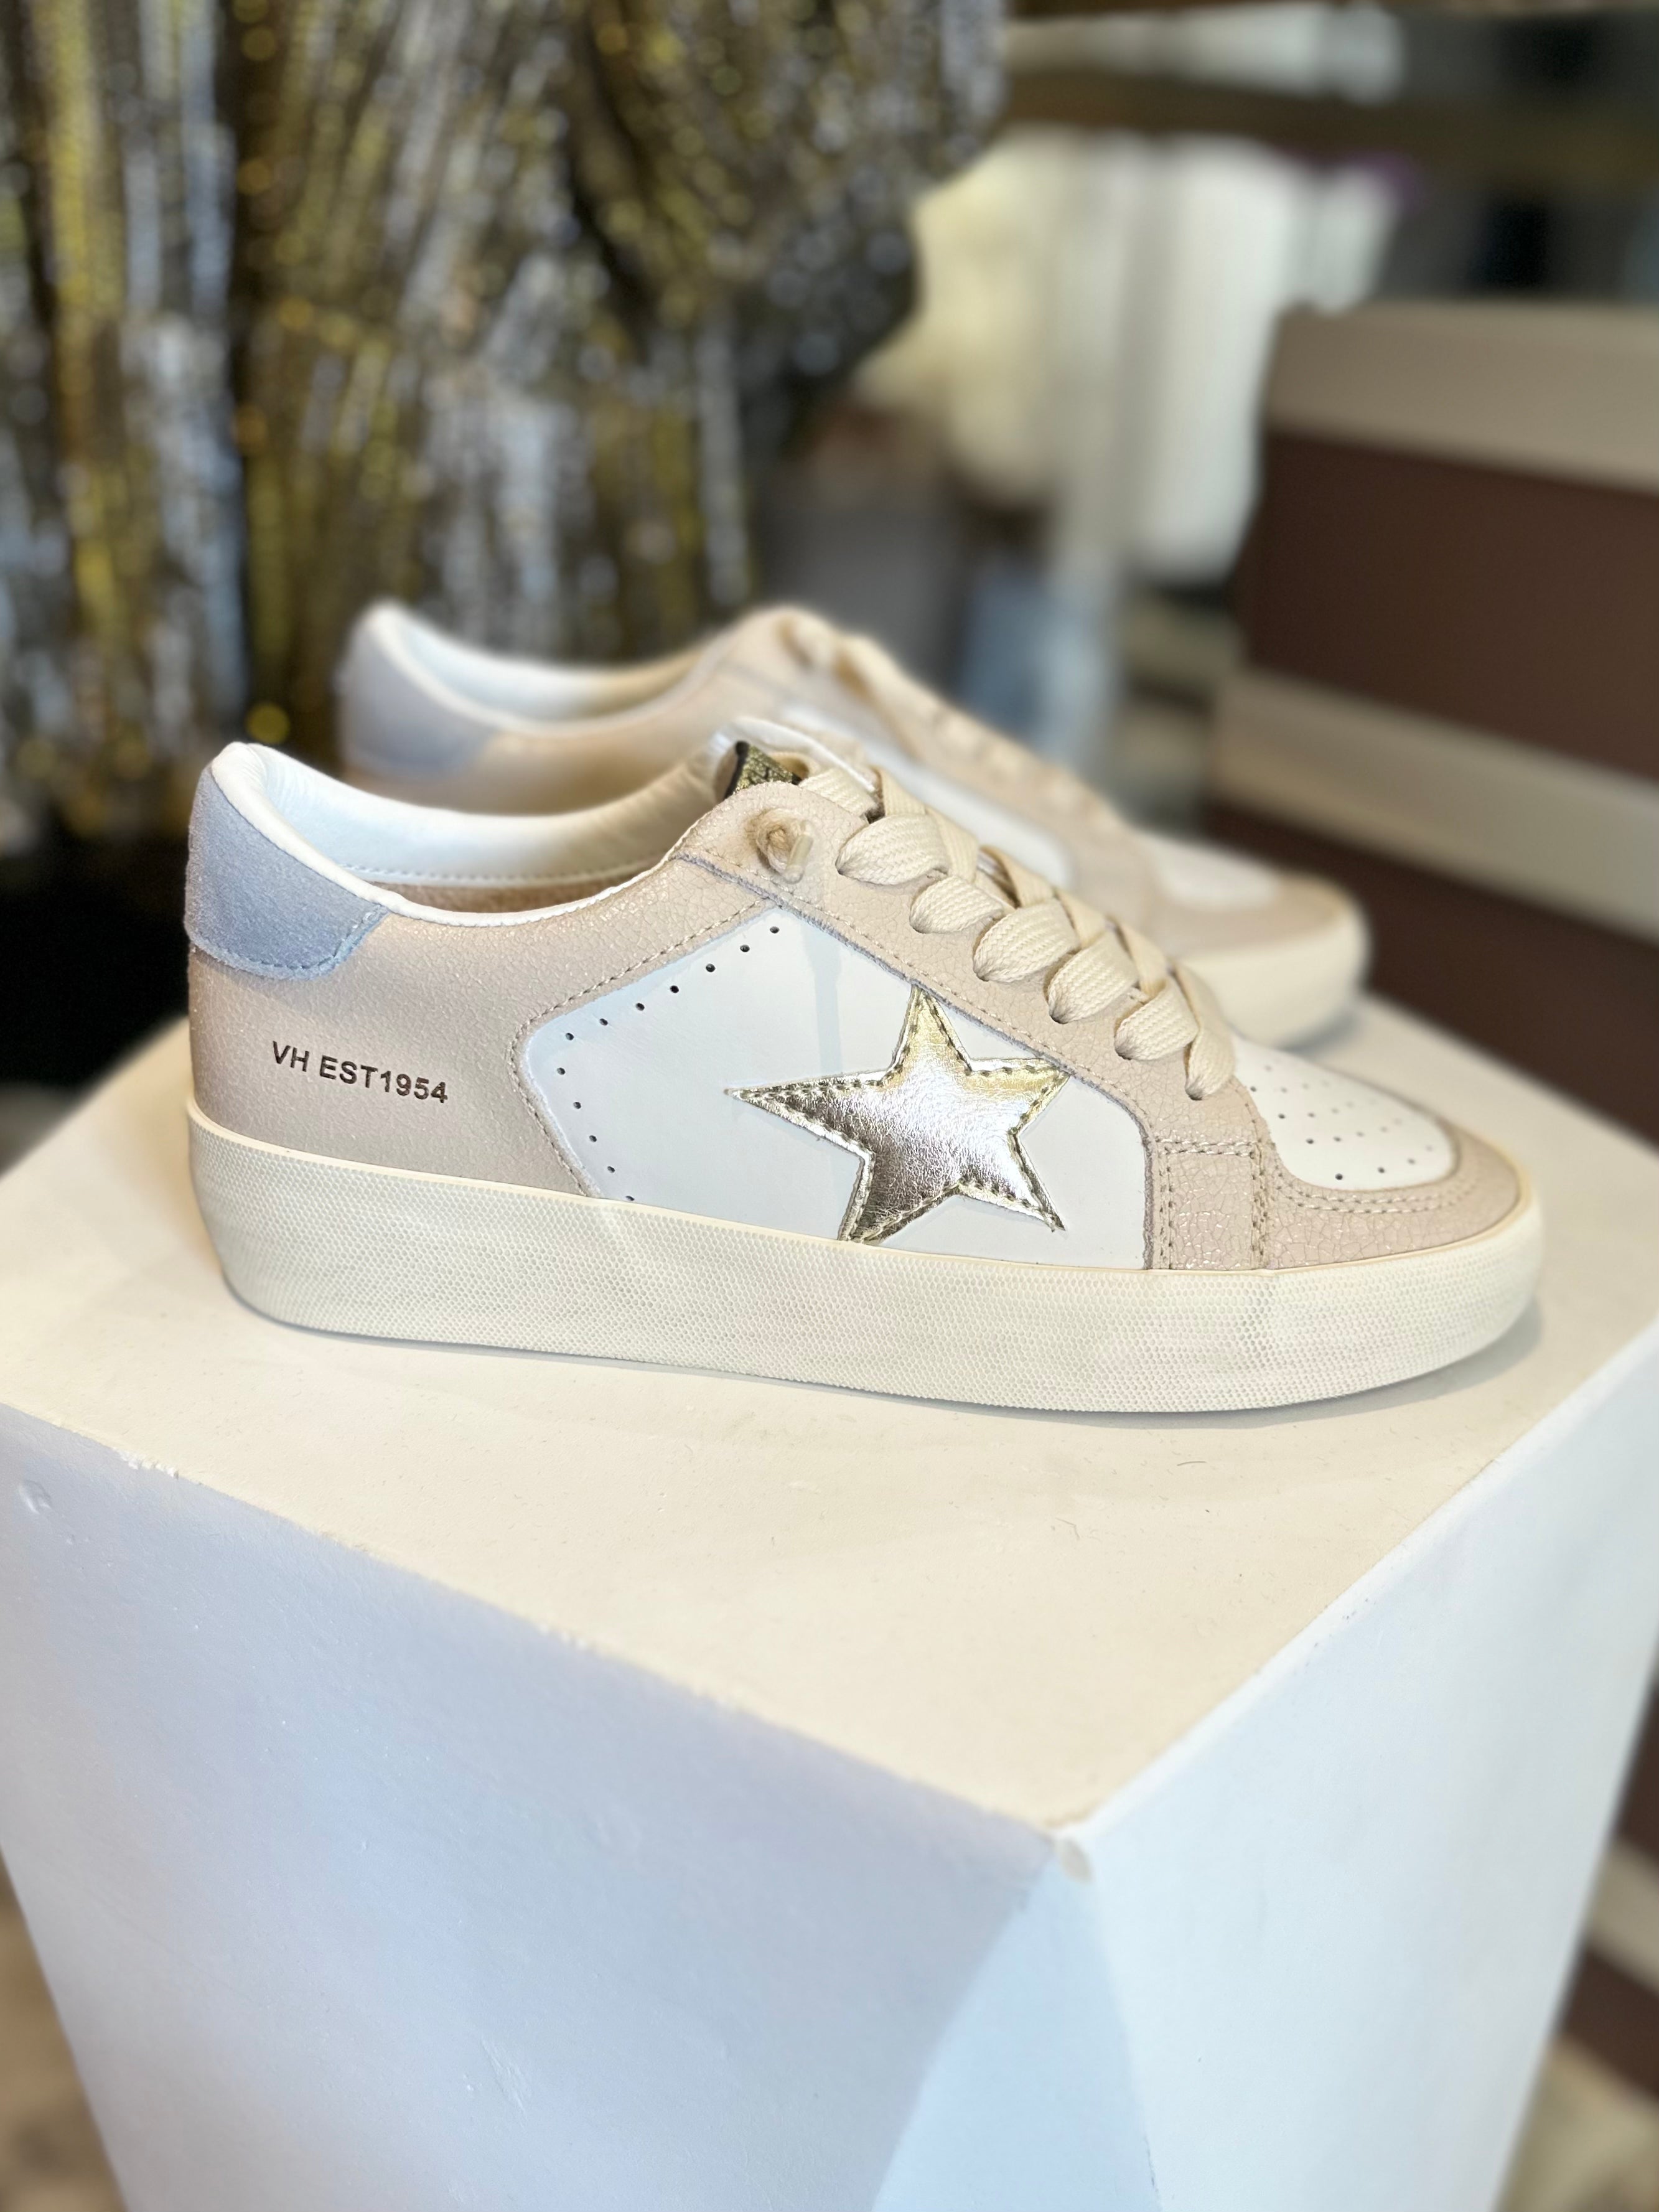 Blush Star Decal Sneakers